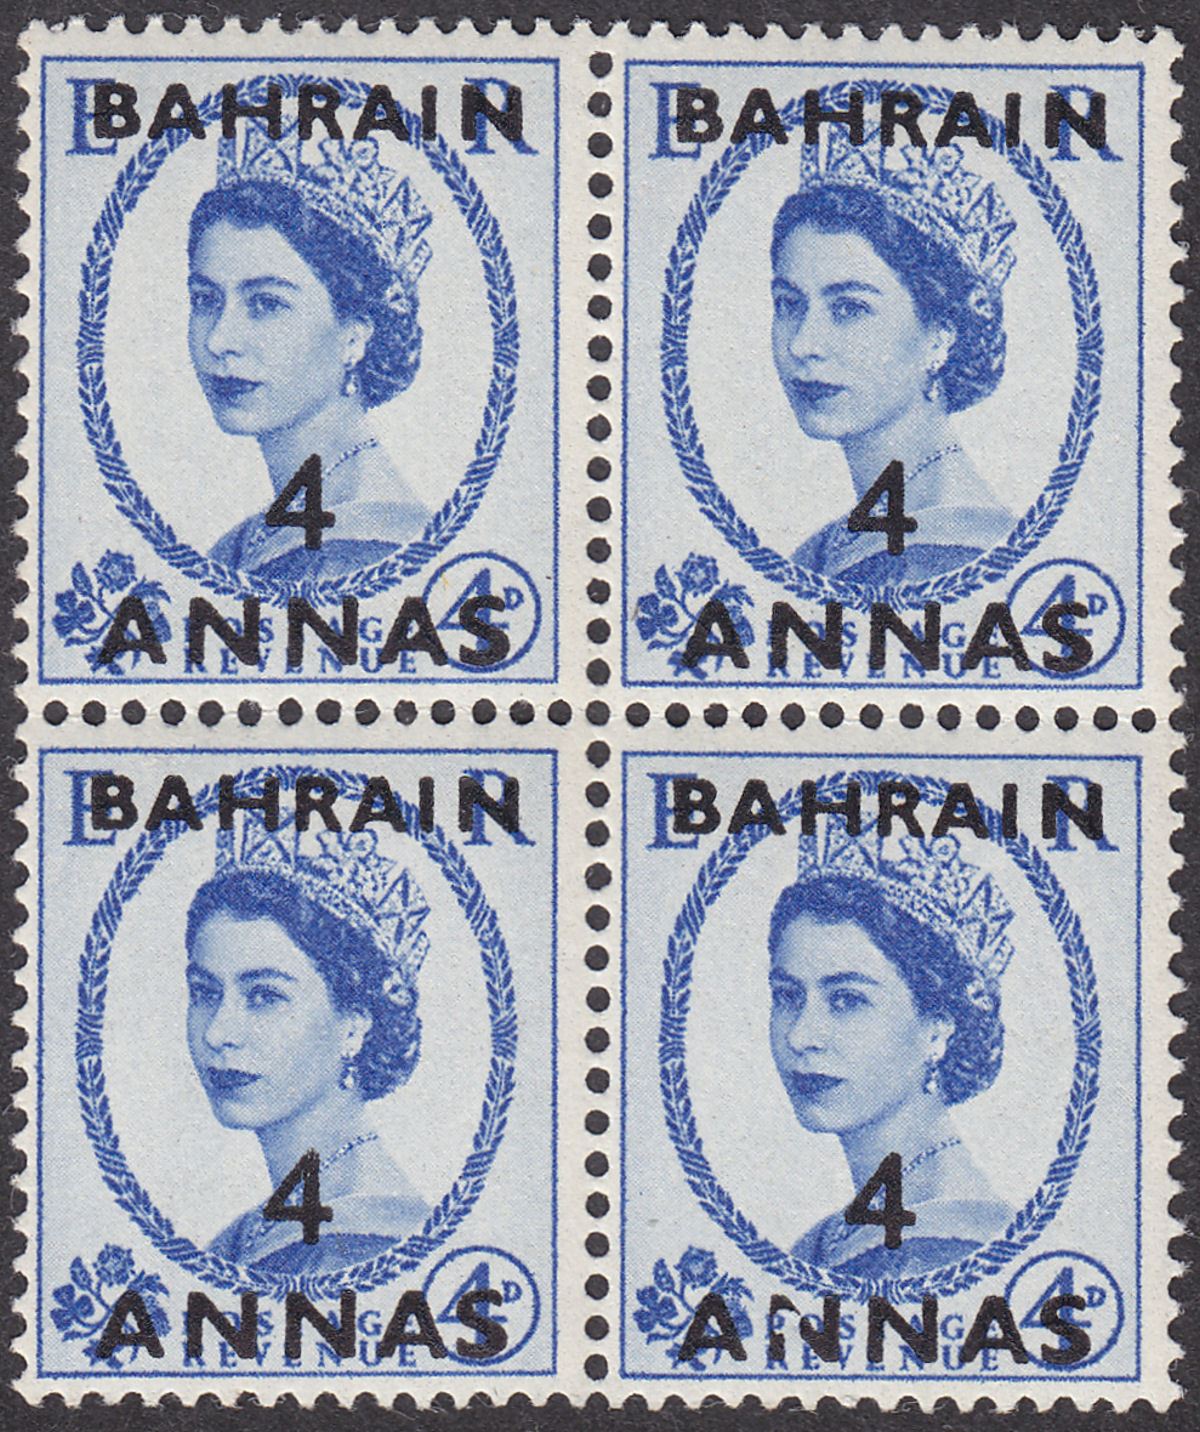 Bahrain 1956 QEII 4a Surcharge on 4d Block of 4 w Broken N of ANNAS Variety Mint